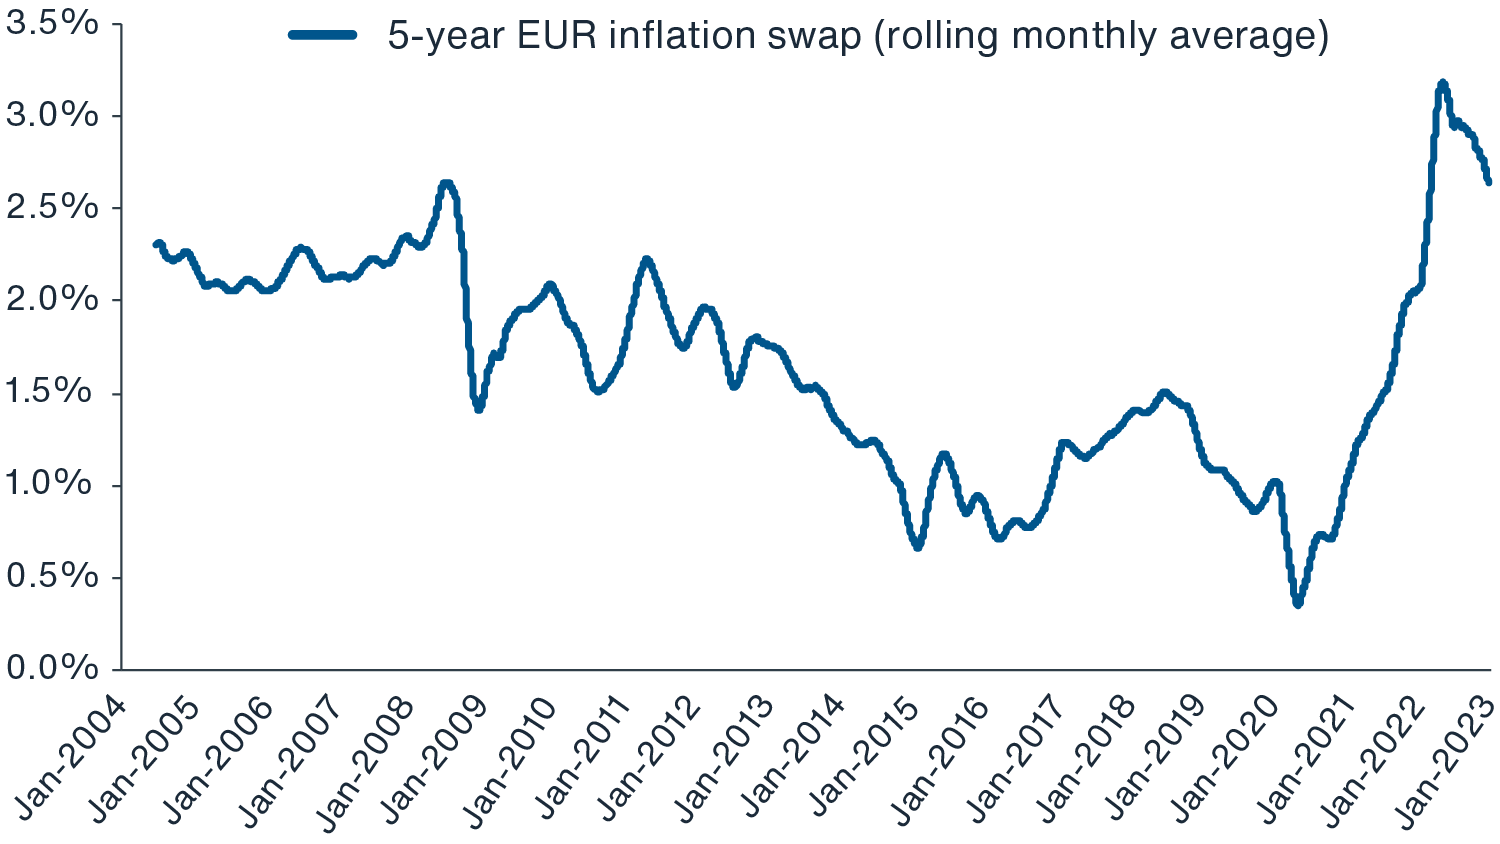 Chart showing that even though inflation in Europe has peaked, long-term inflation expectations remain historically elevated